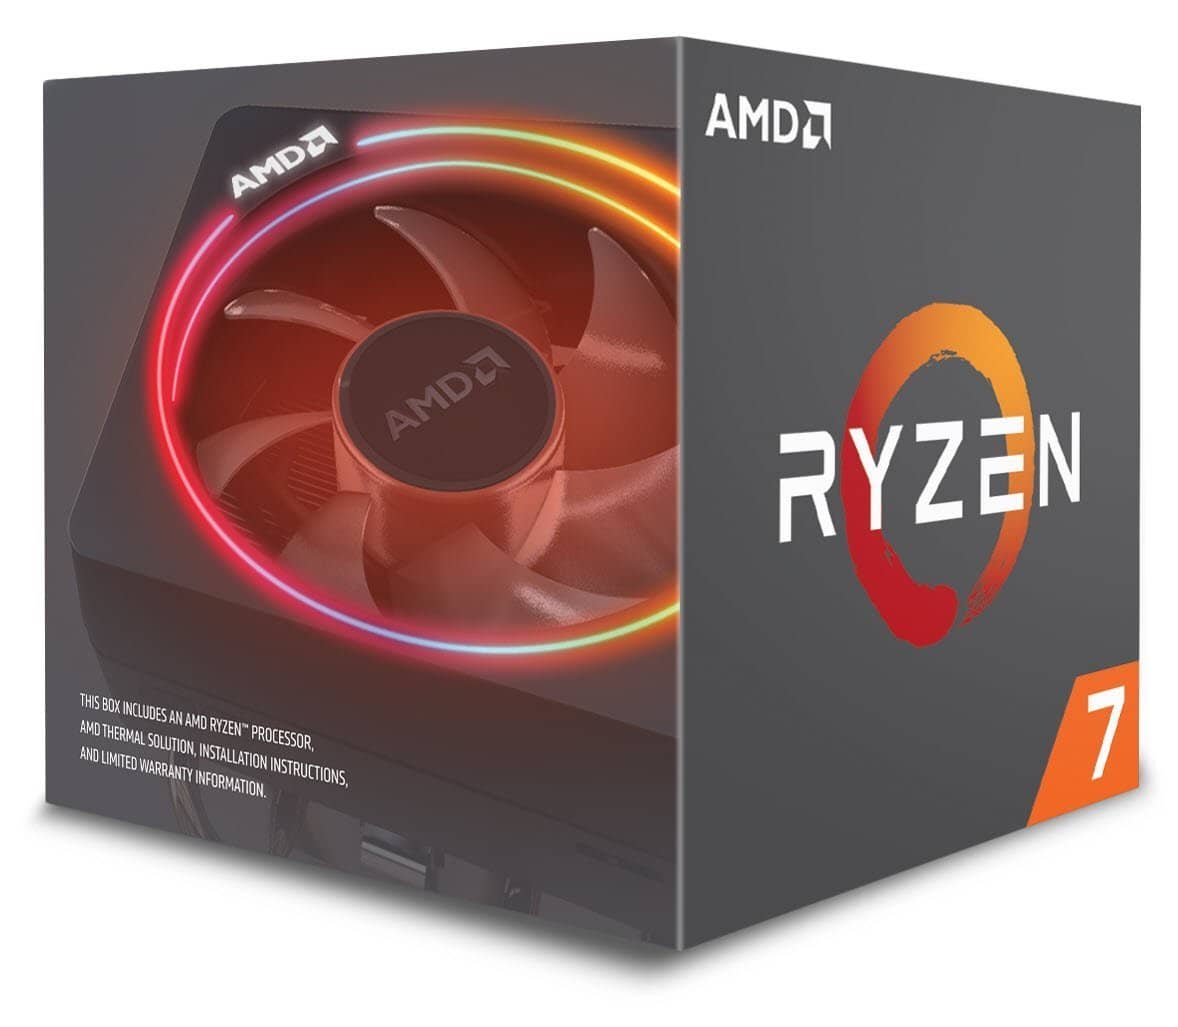 AMD Ryzen 7 2700X Processor with Wraith Prism LED Cooler with AORUS Gaming 7 WIFI